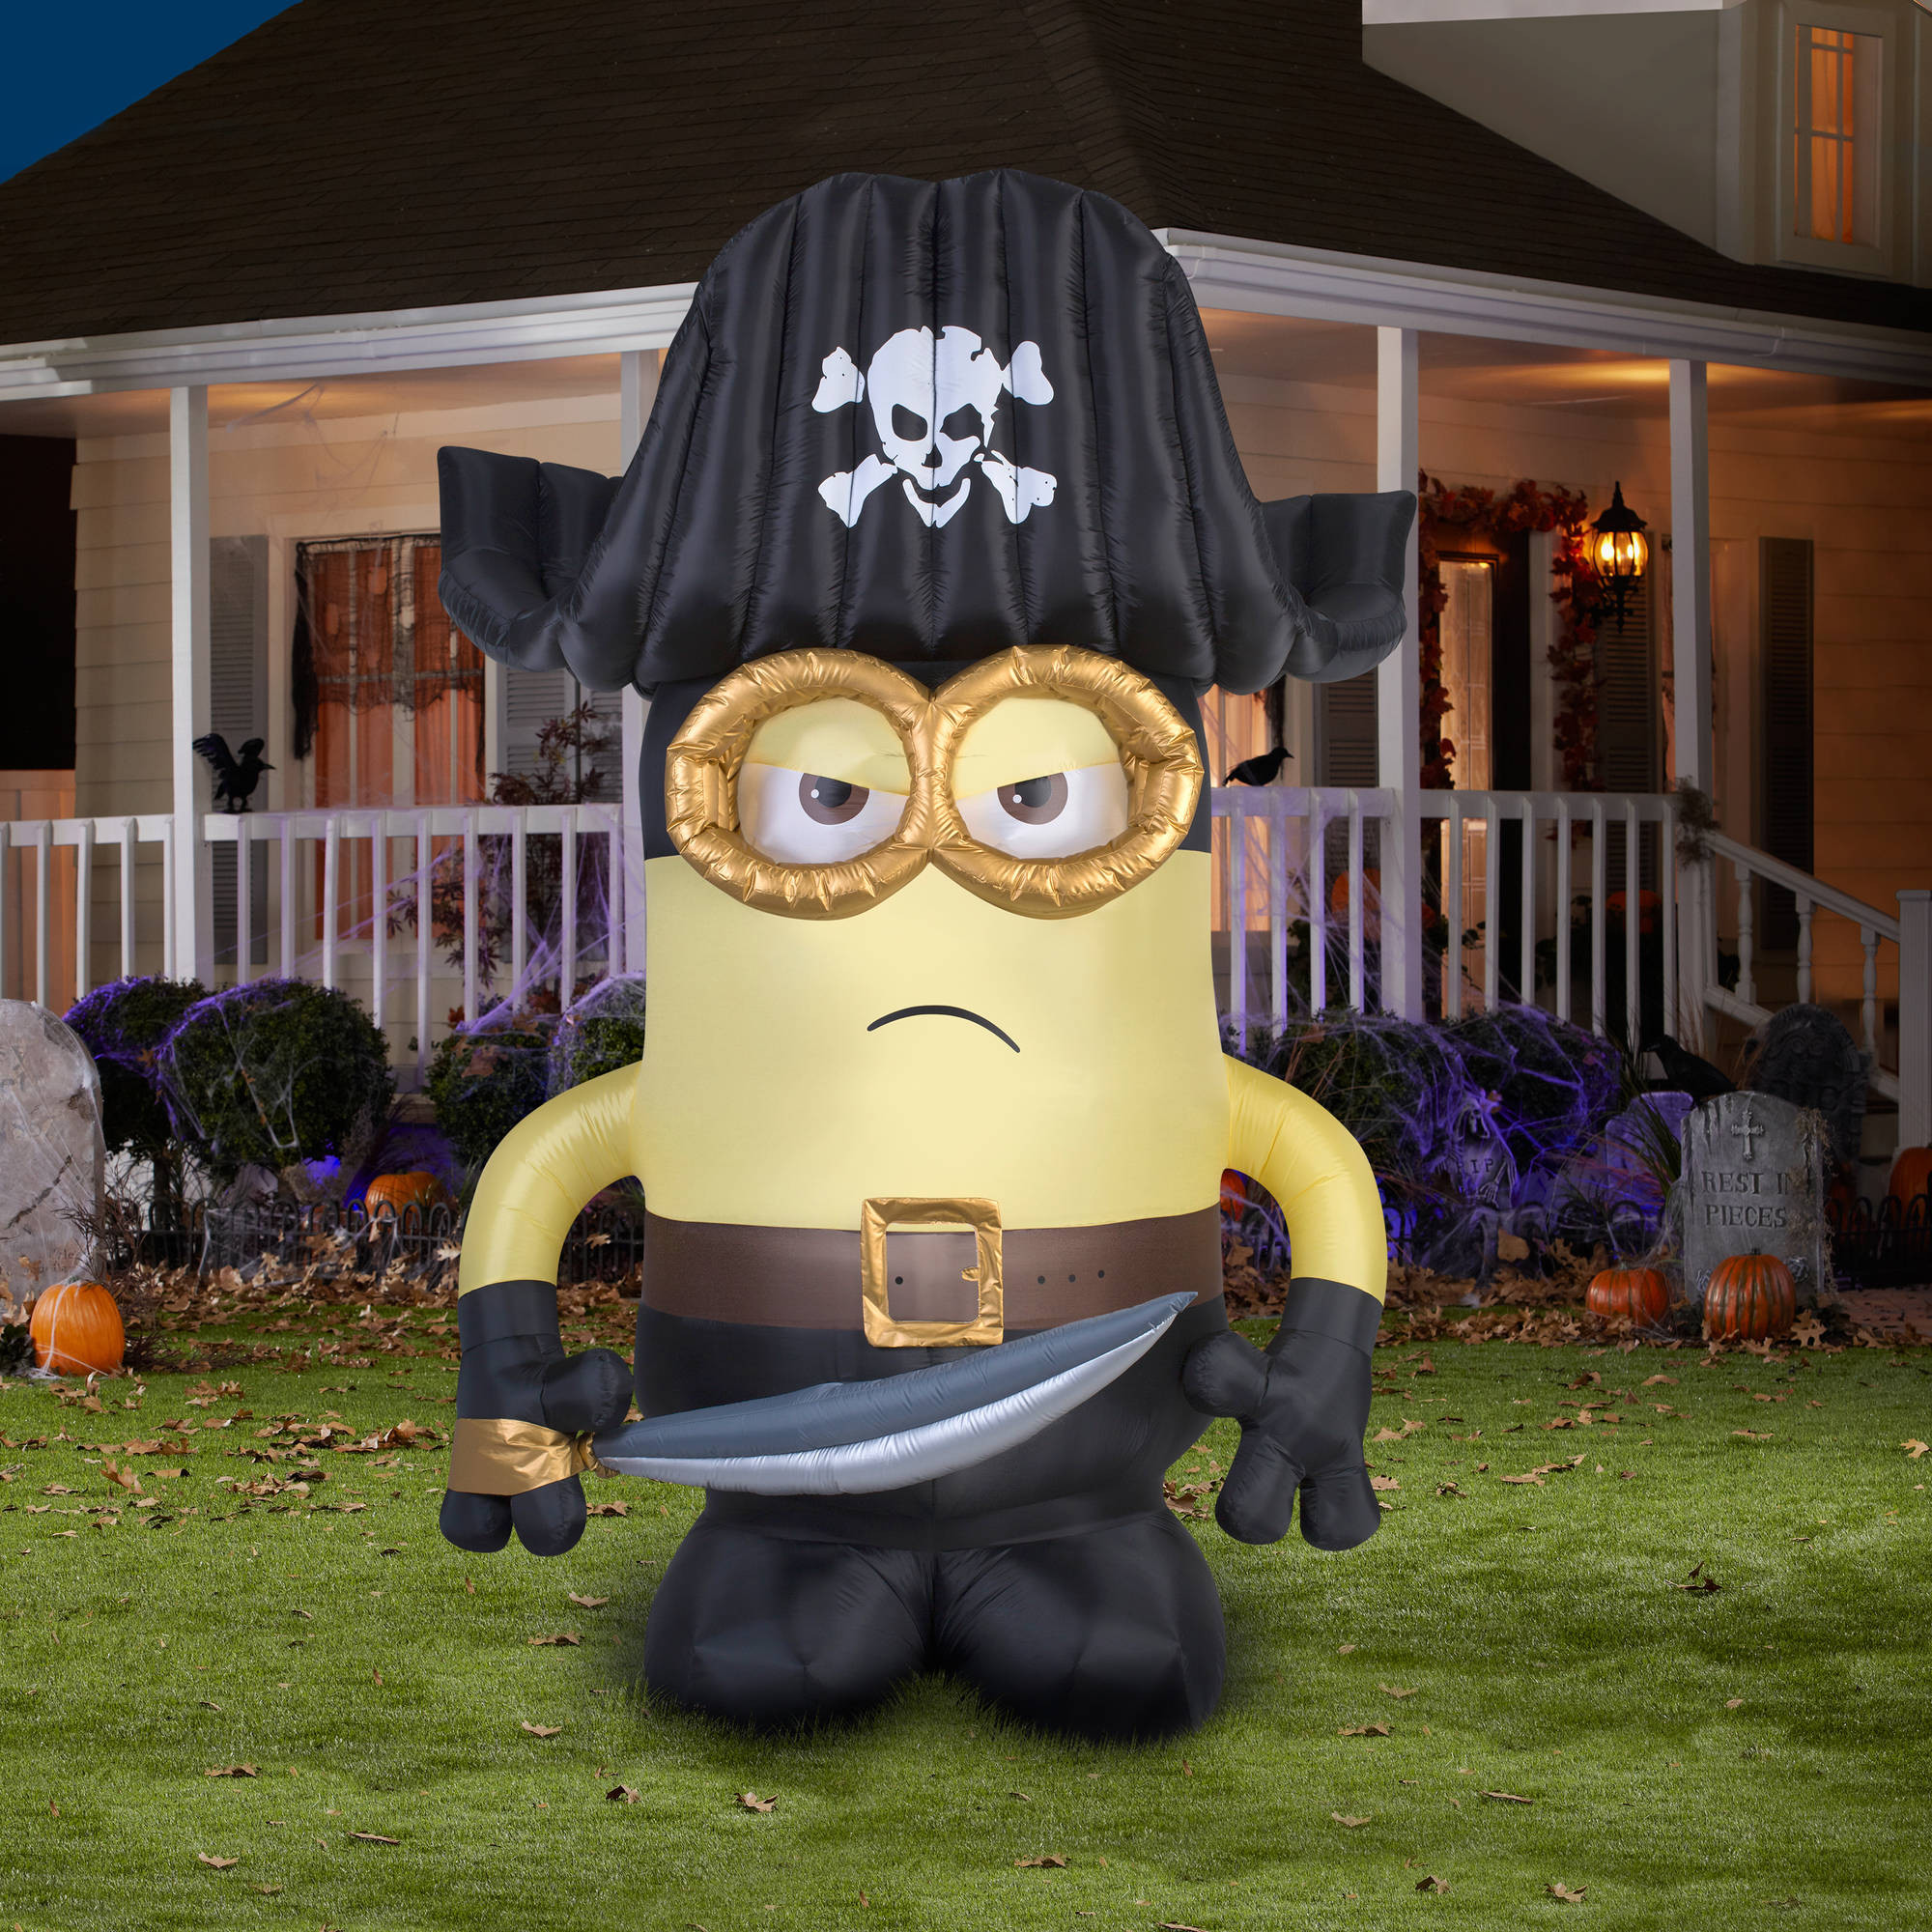 Outdoor Inflatable Halloween Decorations
 Gemmy Airblown Inflatable 9 X 6 Giant Eye Pirate Matie